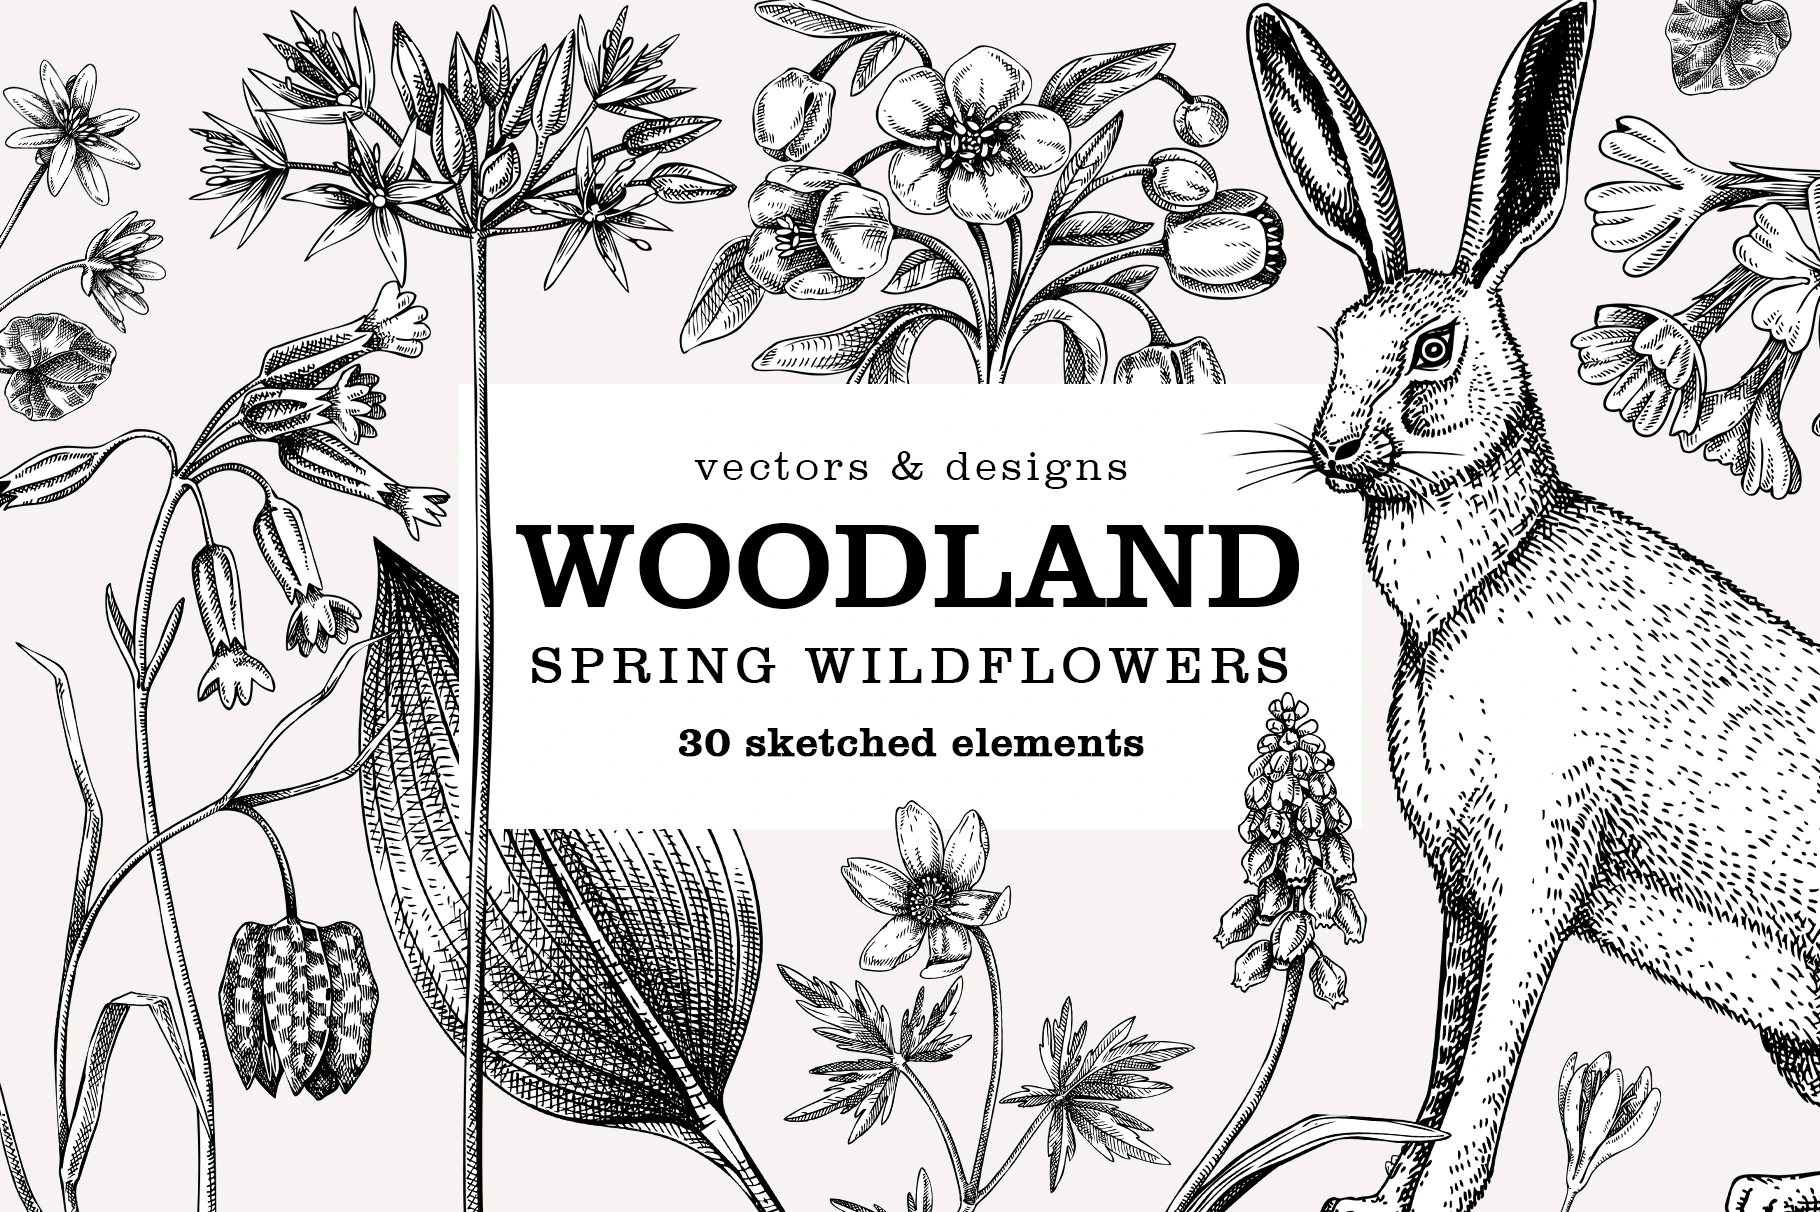 Spring wildflowers collection. Woodland plants and flowers vector sketches. Illustration